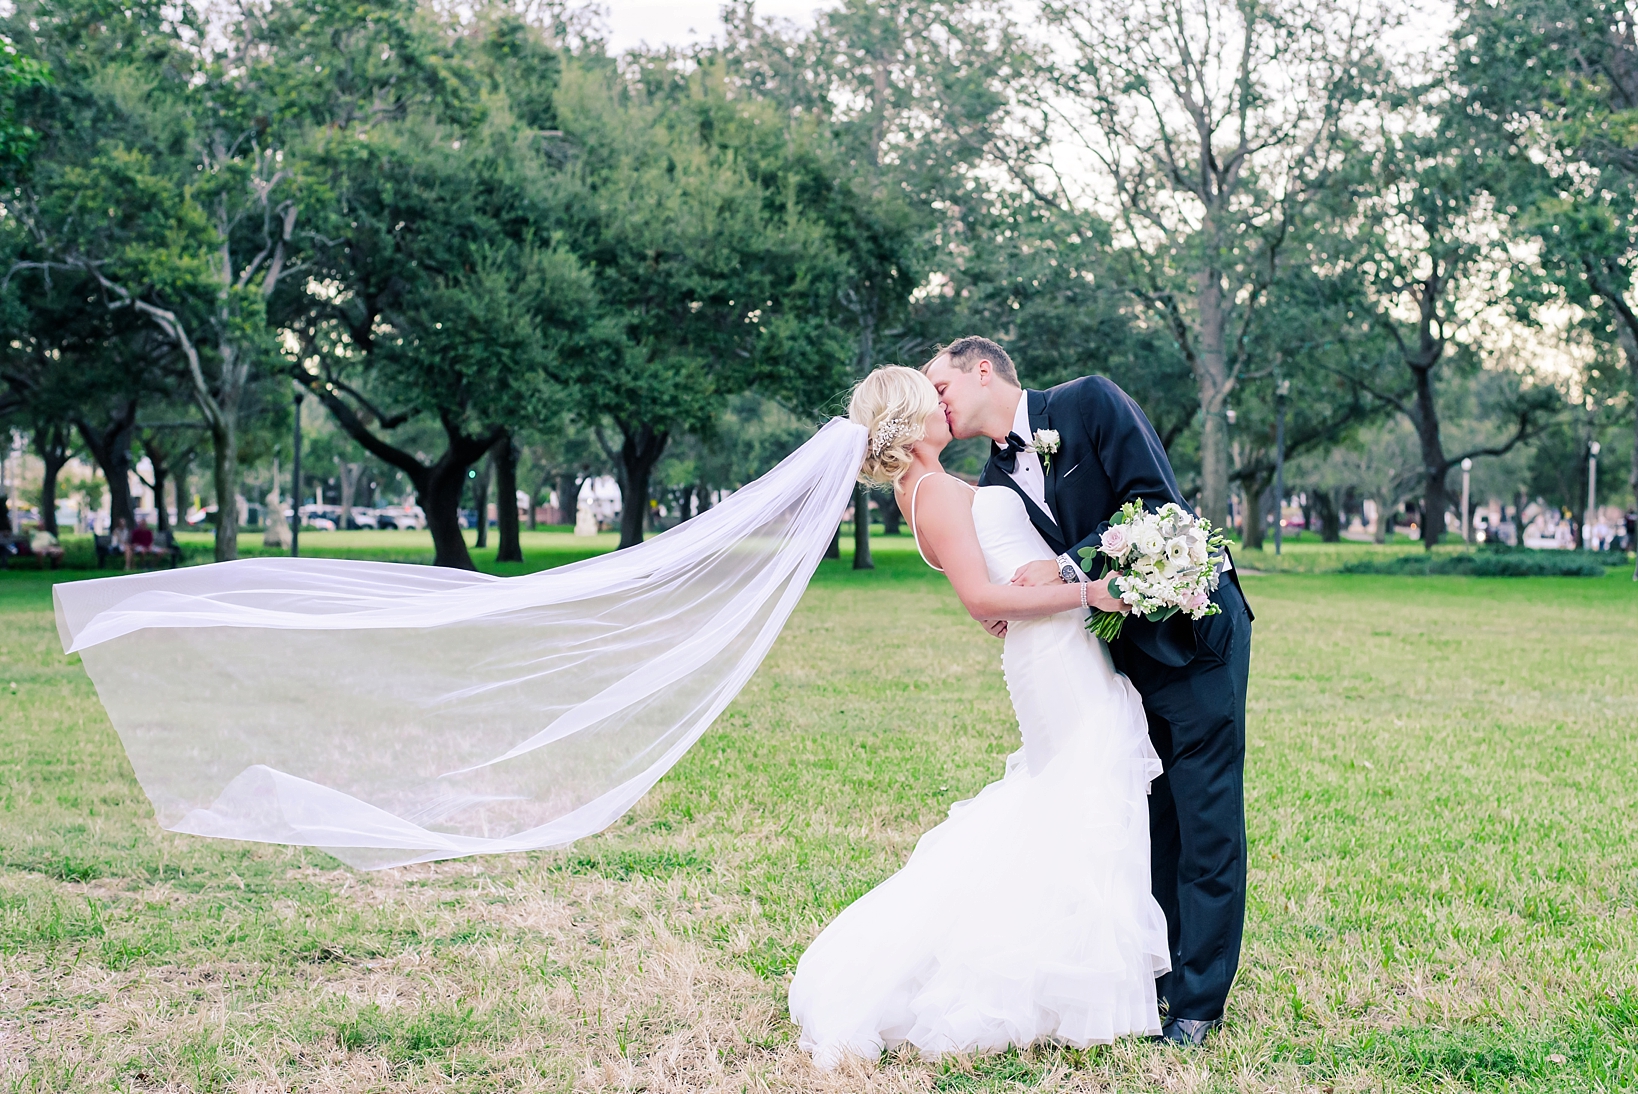 Bride and Groom in a deep kiss as the wind blows the veil